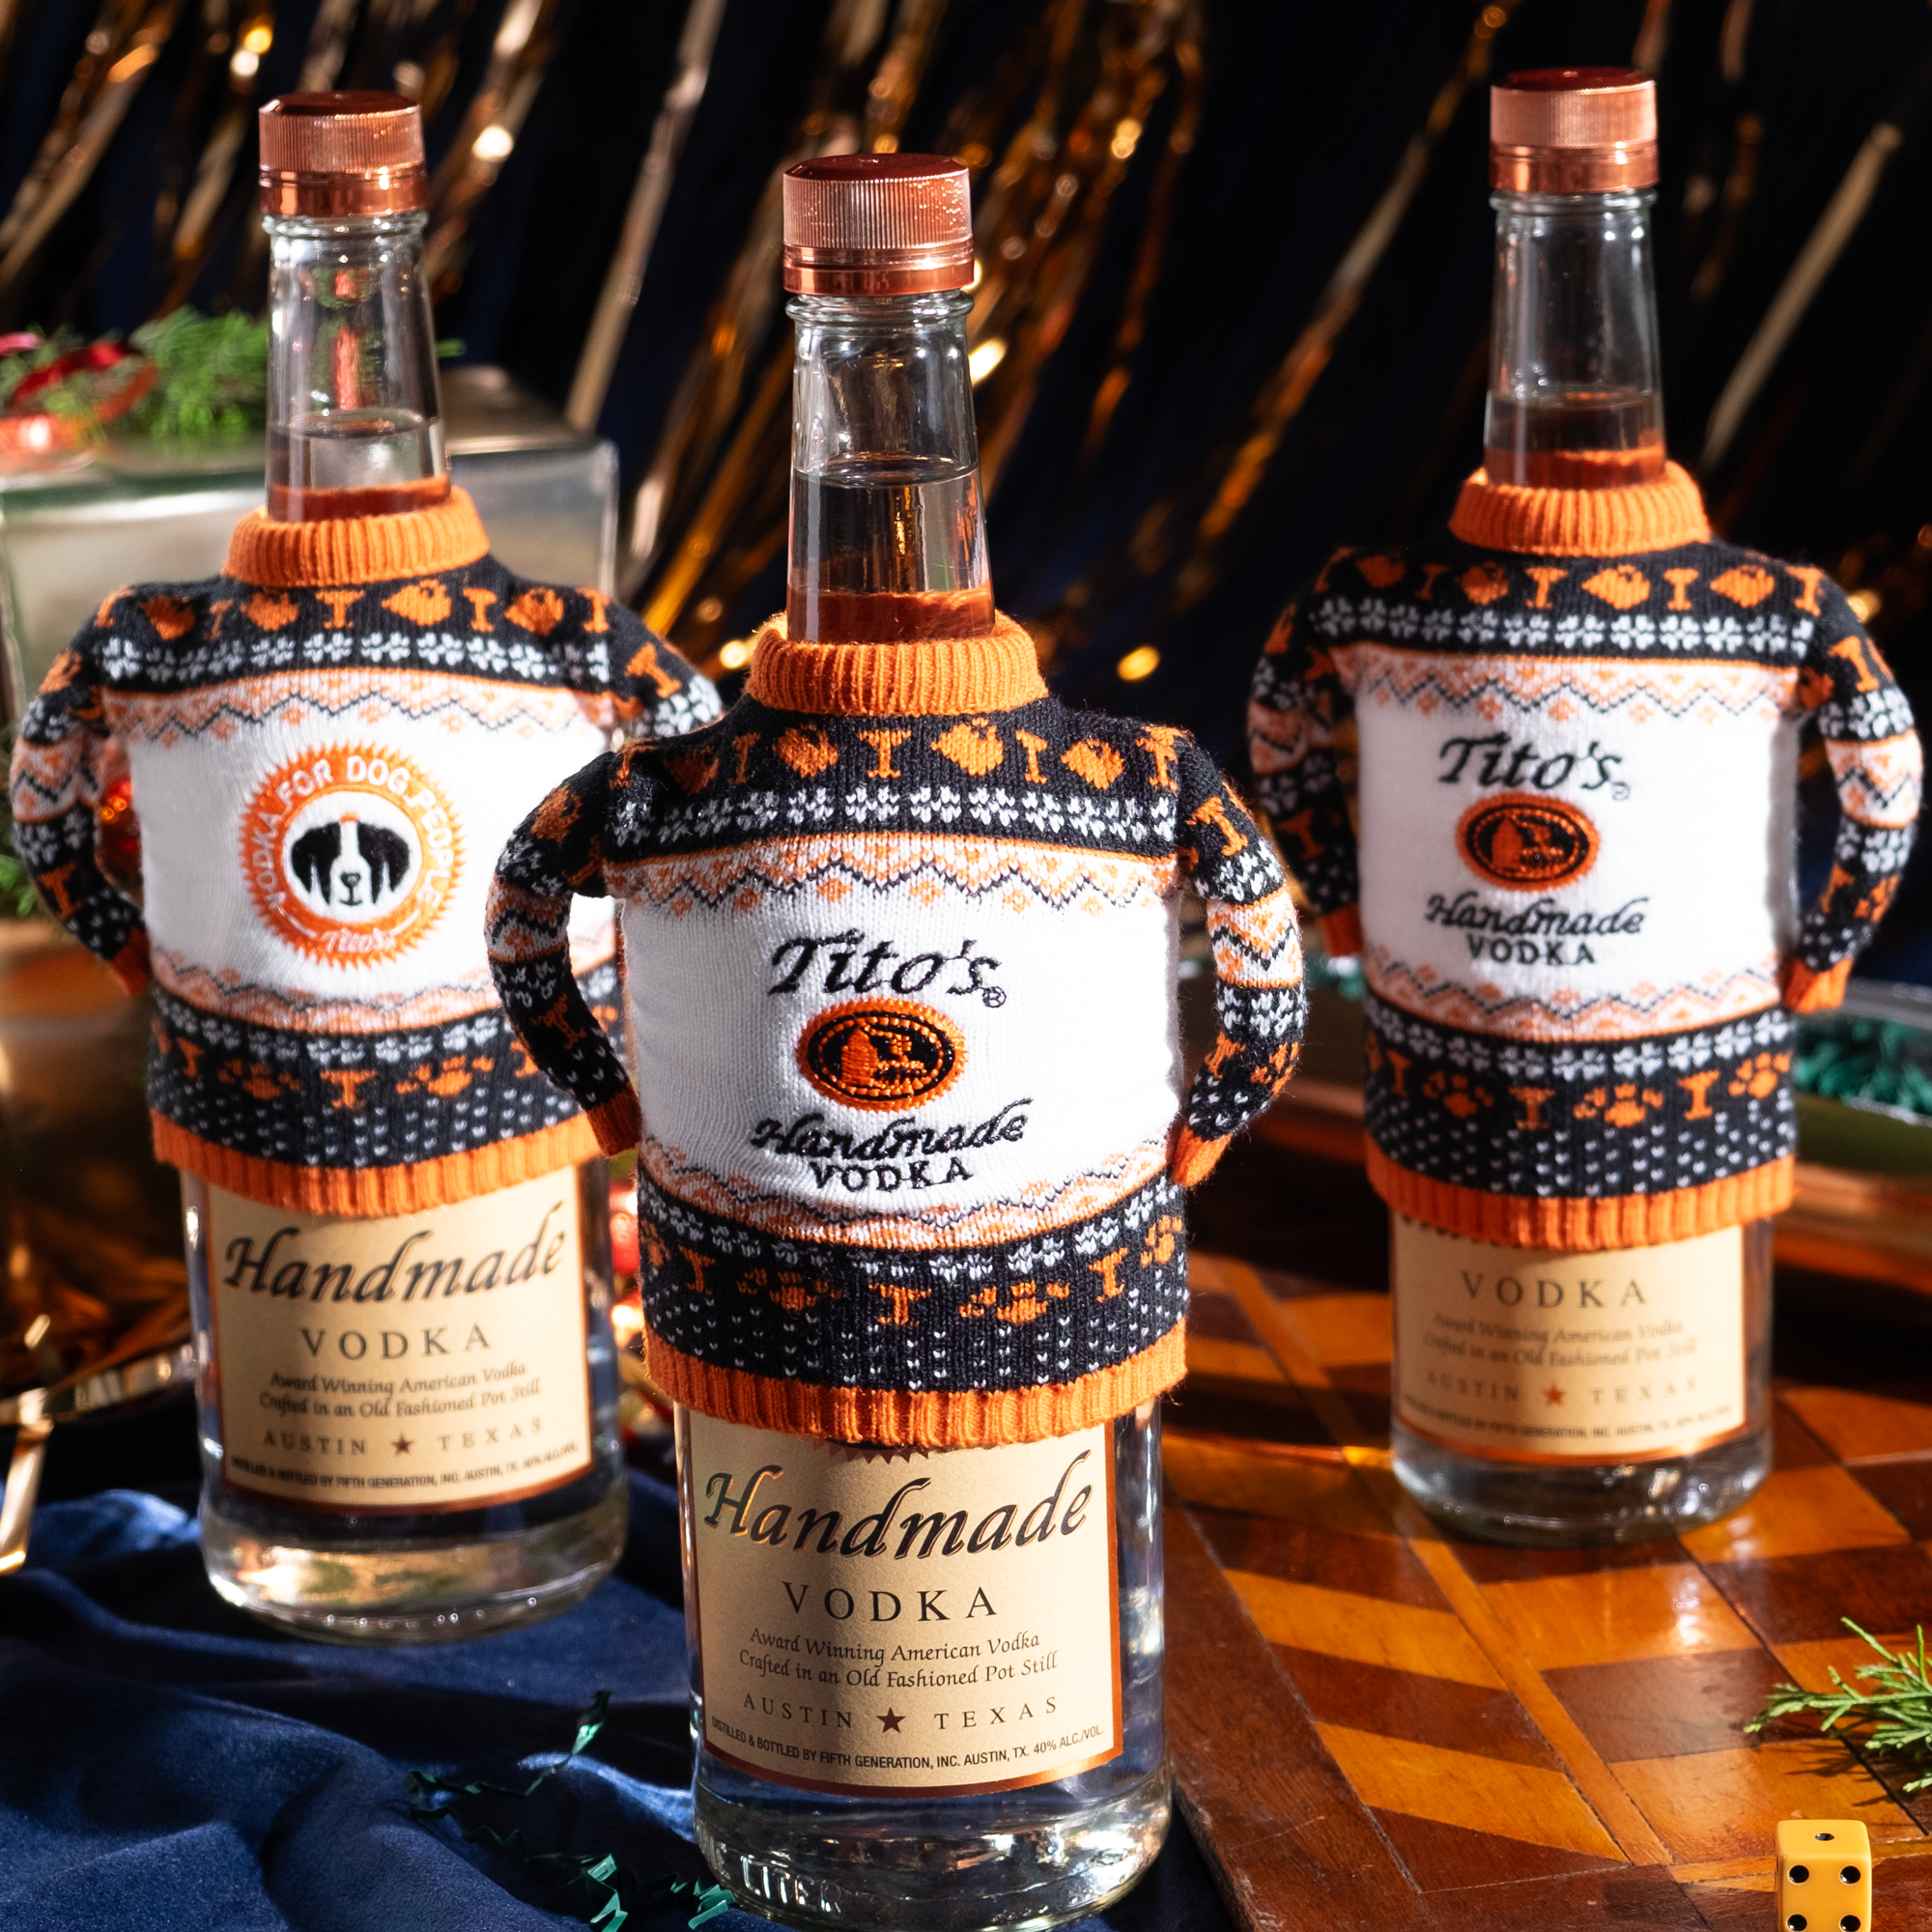 Three Tito's Handmade Vodka bottles with bottle sweaters